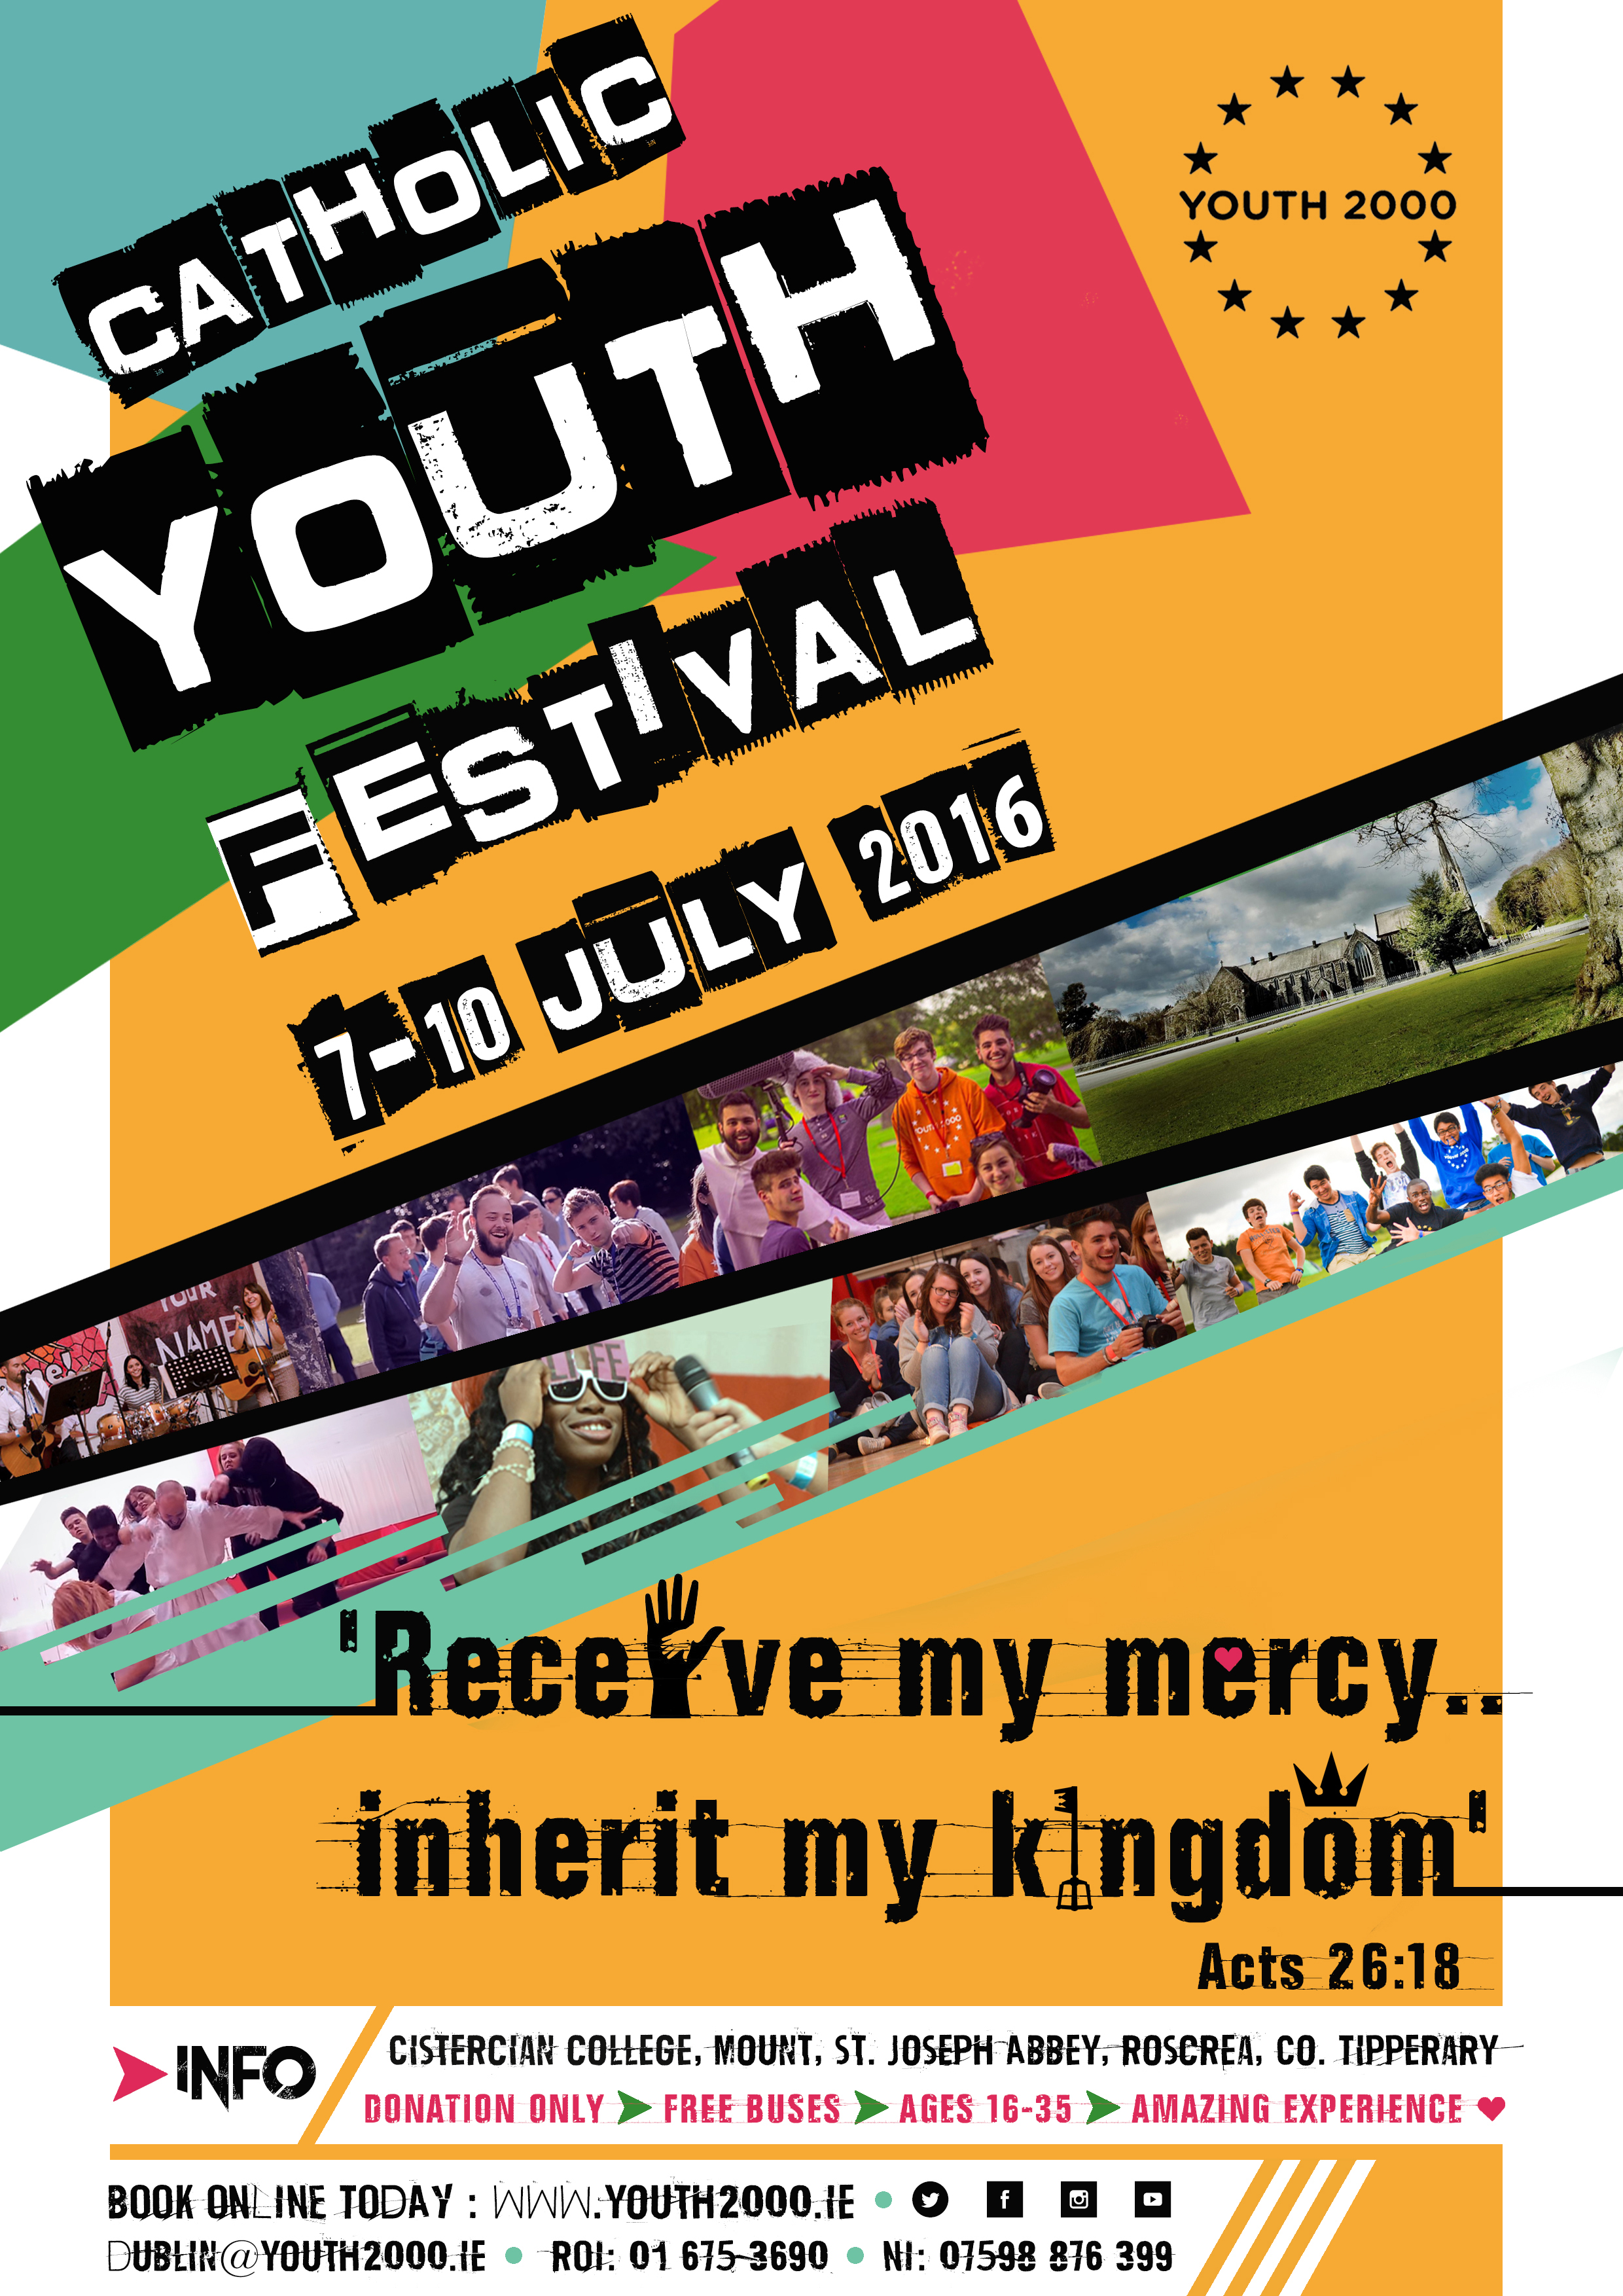 Youth 2000 Summer Festival to take place in July - Catholic News